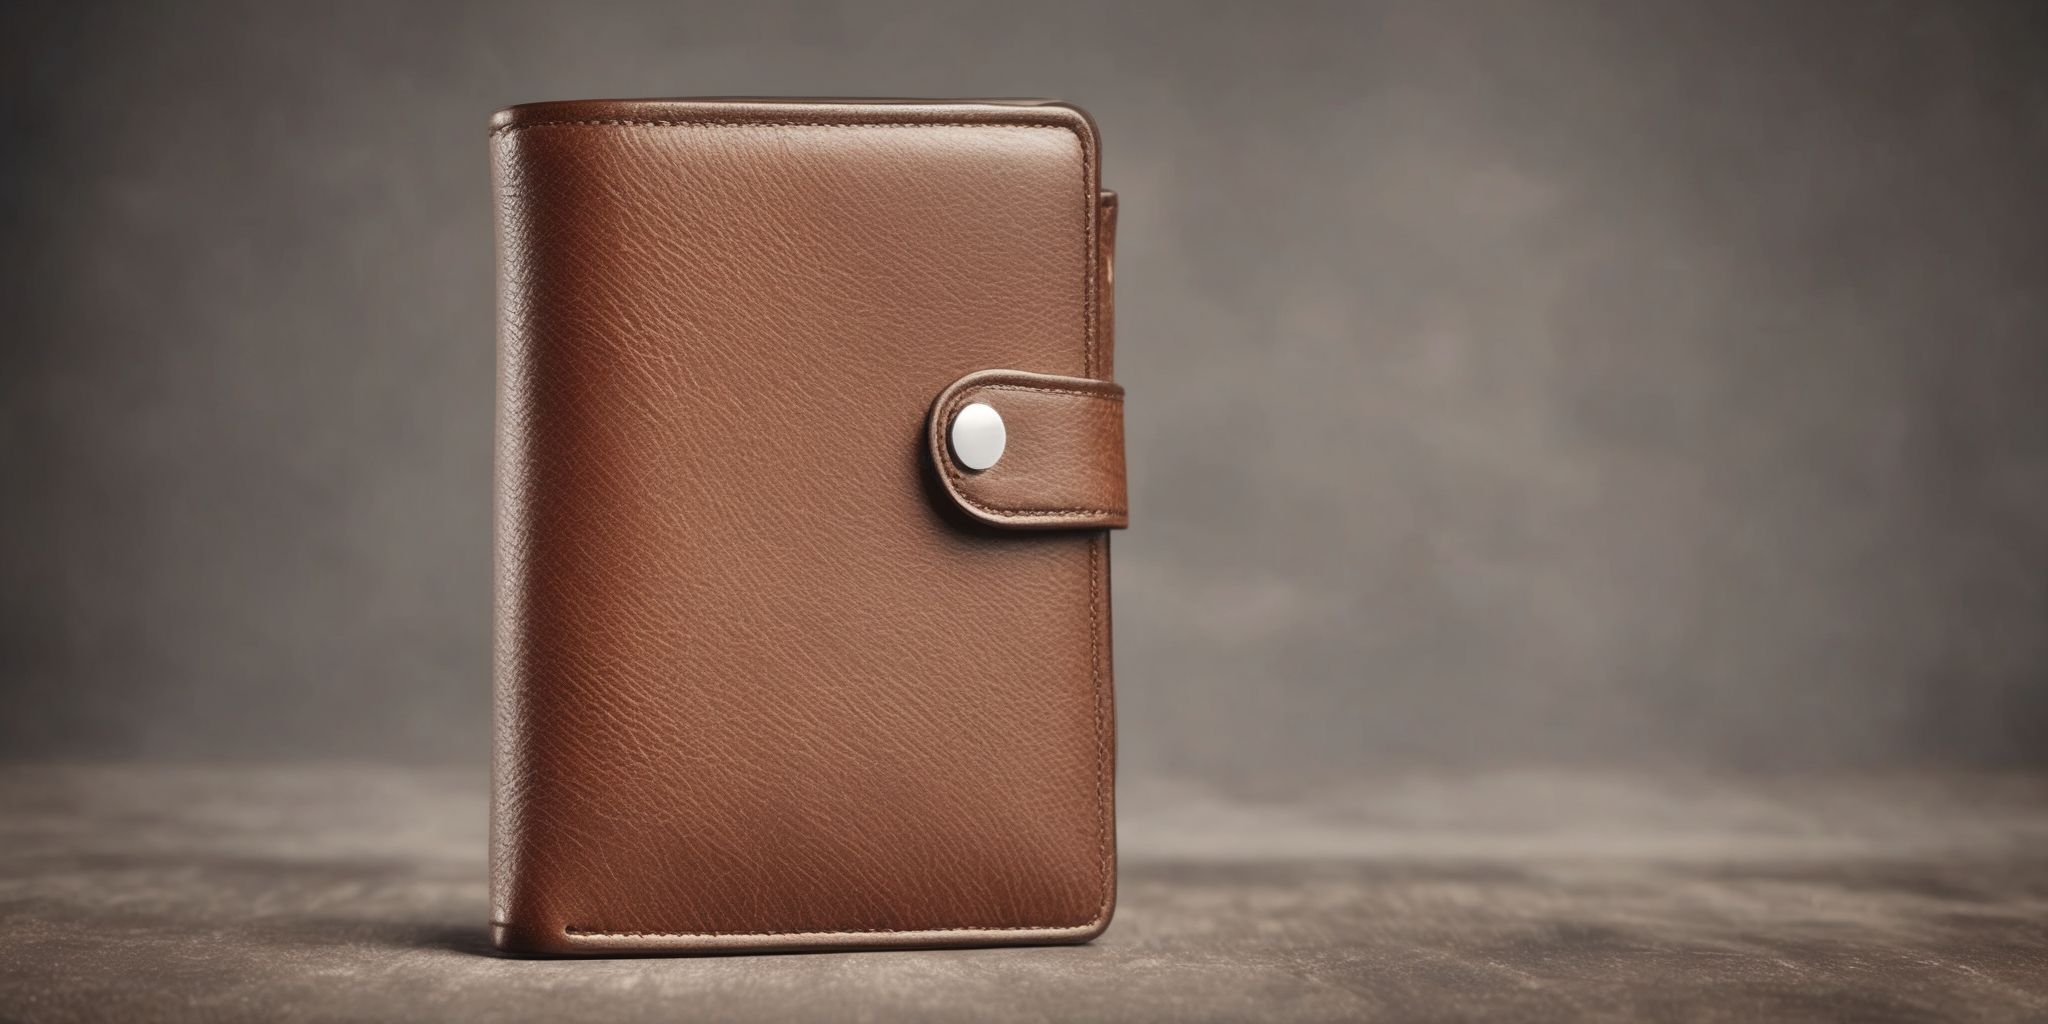 Wallet  in realistic, photographic style